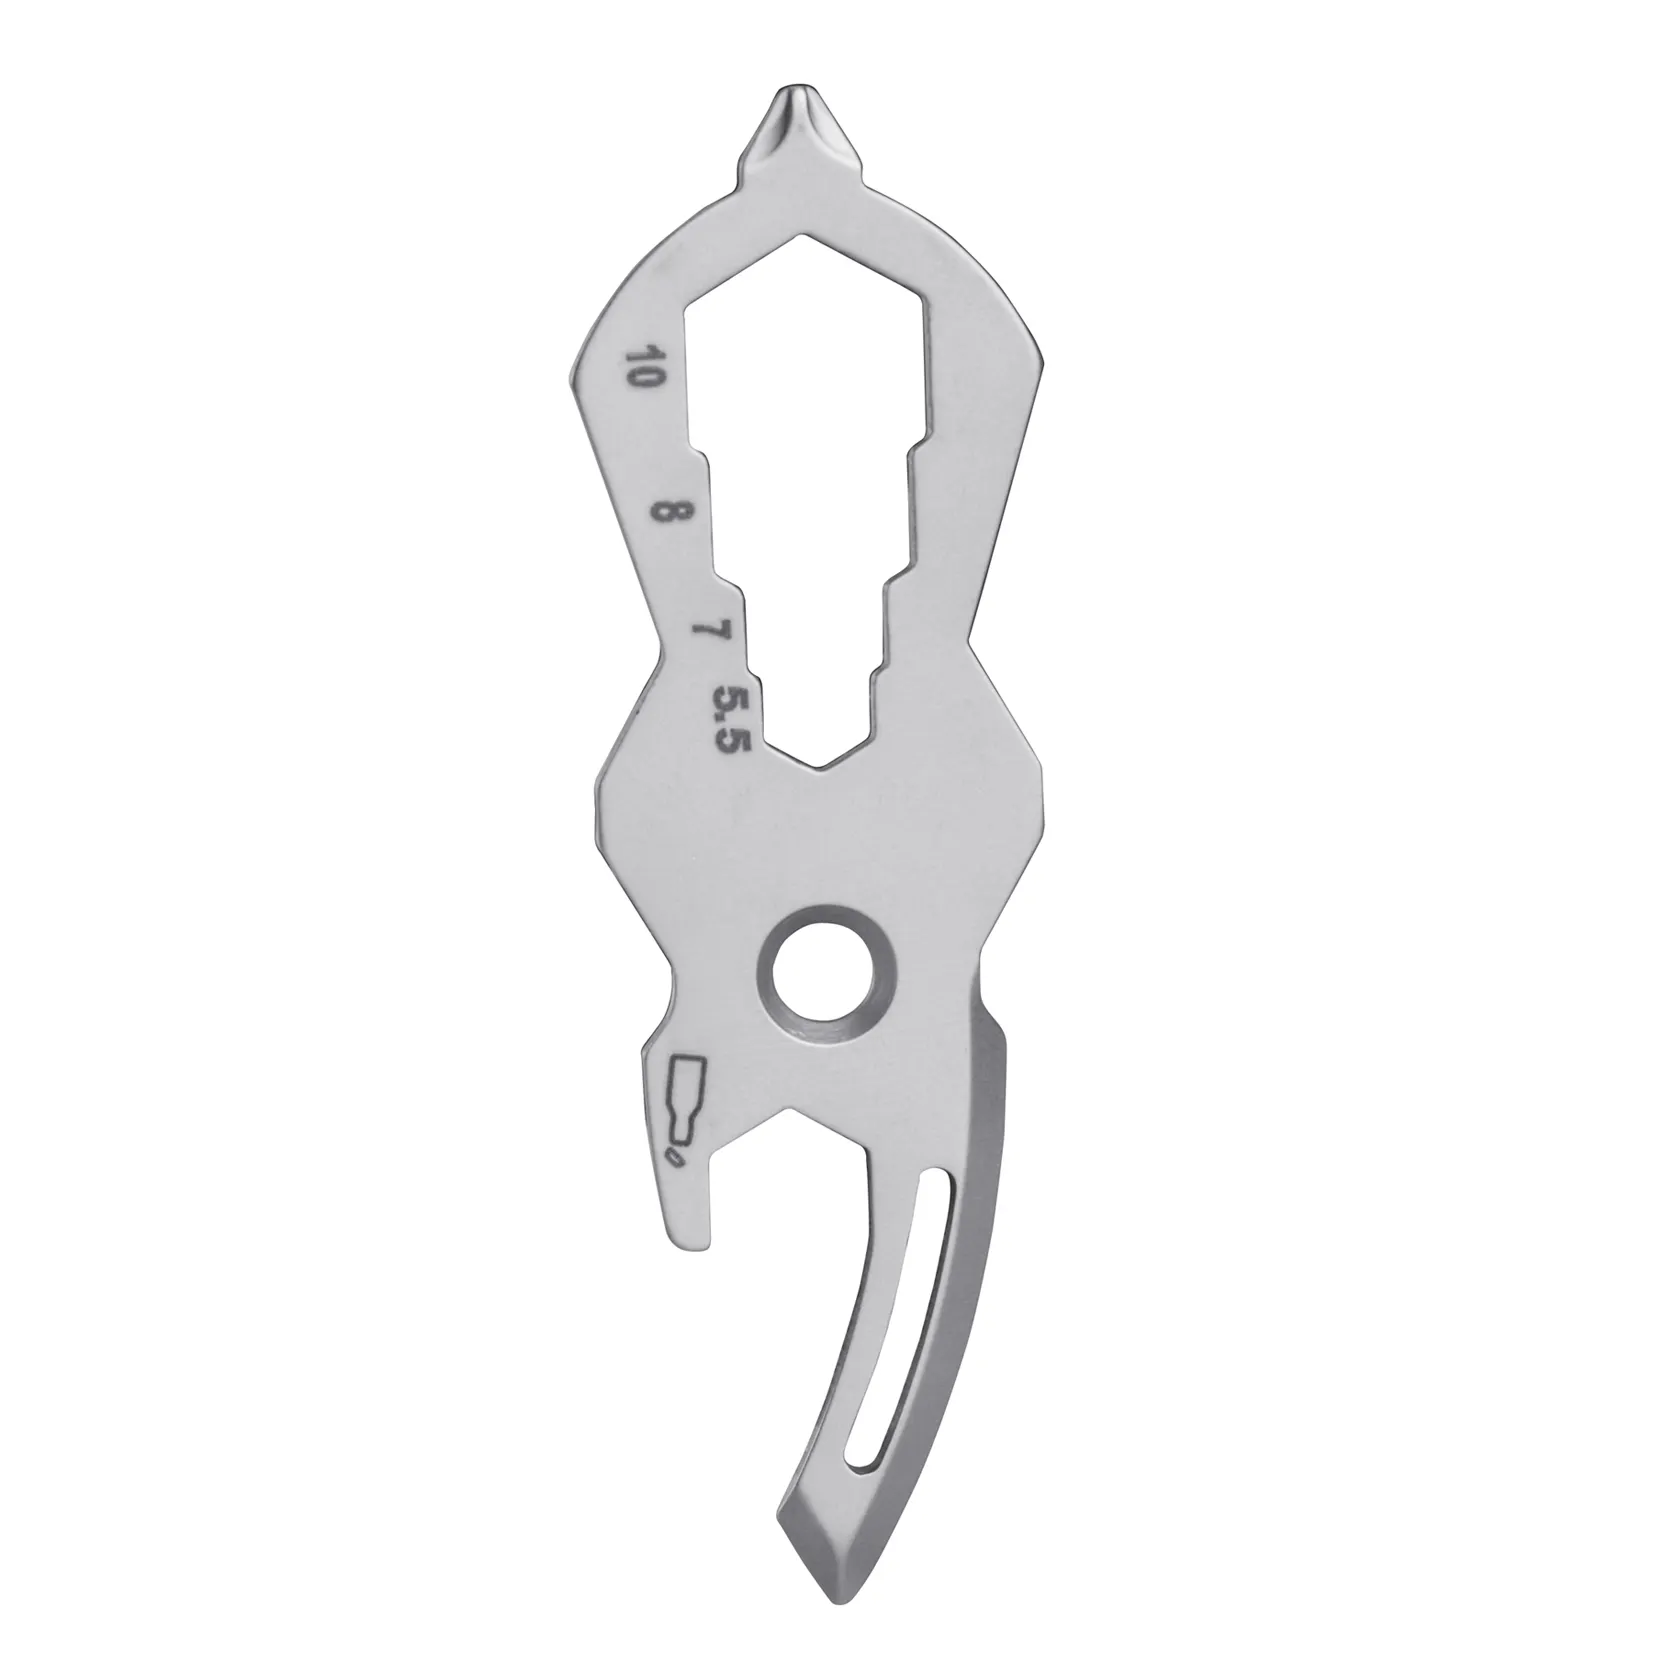 Card Multi Tool High Quality Stainless Steel Fine Blanking Keychain EDC Credit Card Multi Tool MULTITOOLS Credit Card